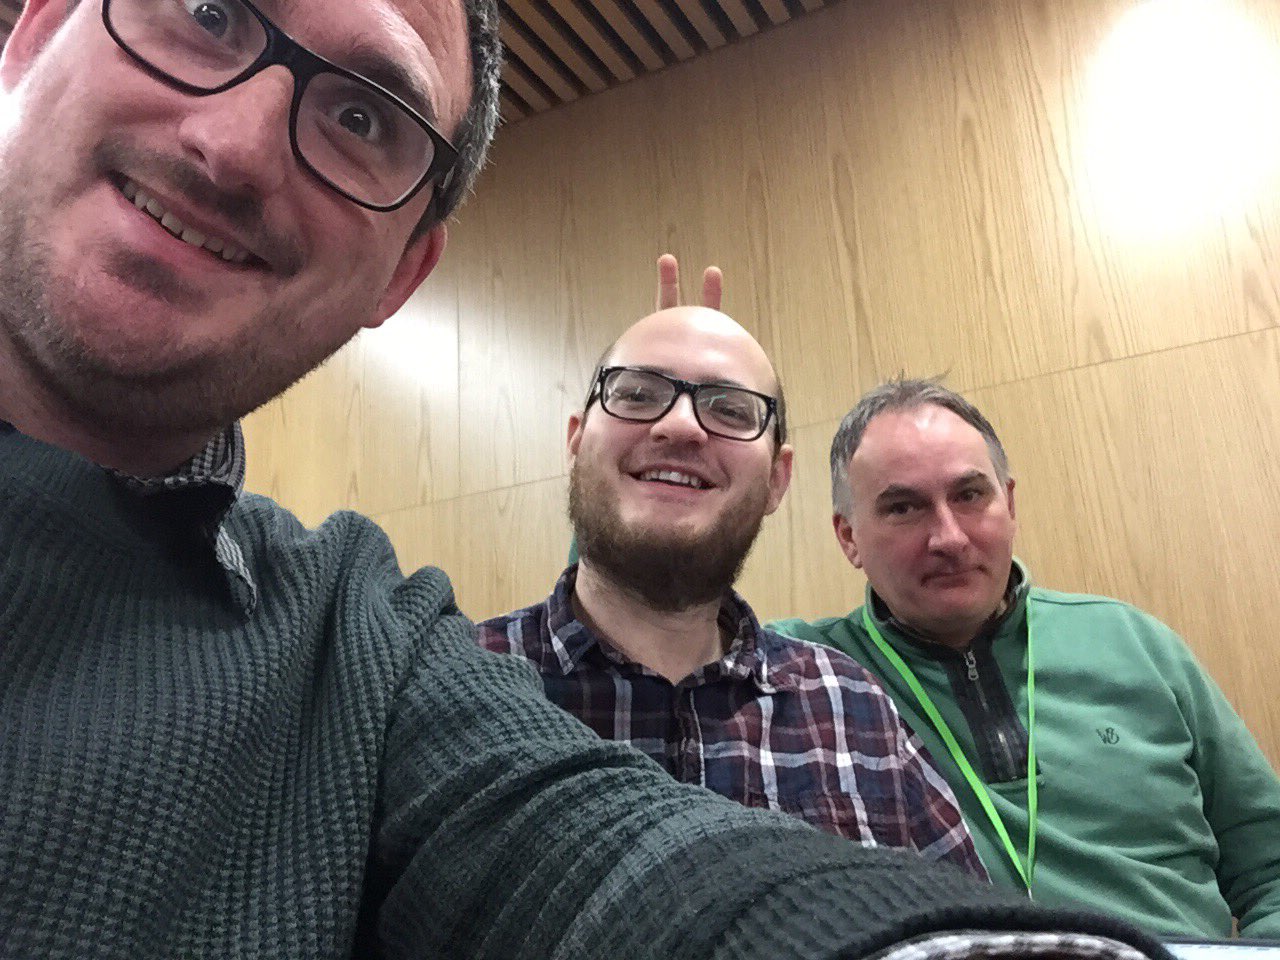 Sheffield boys on tour (just down the road....) @Andy_Tattersall @tompjolley #SocMedHE17 https://t.co/HypVIyhv19